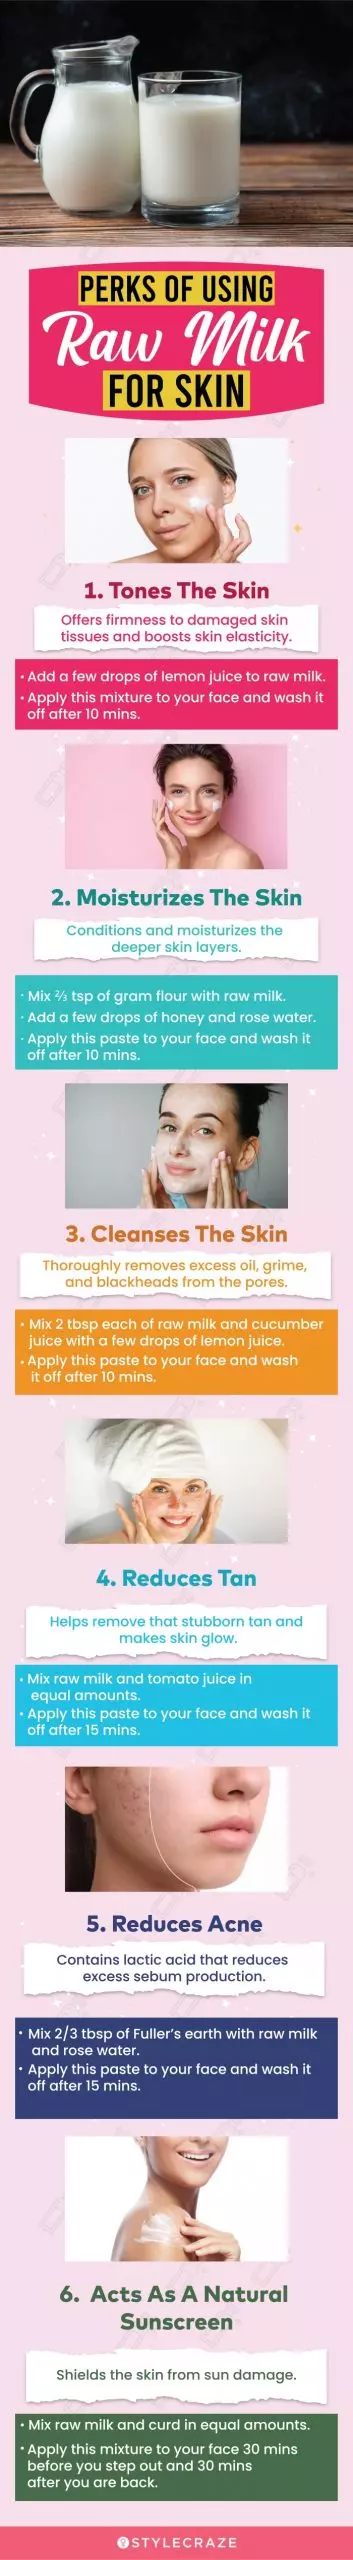 perks of using raw milk for skin (infographic)